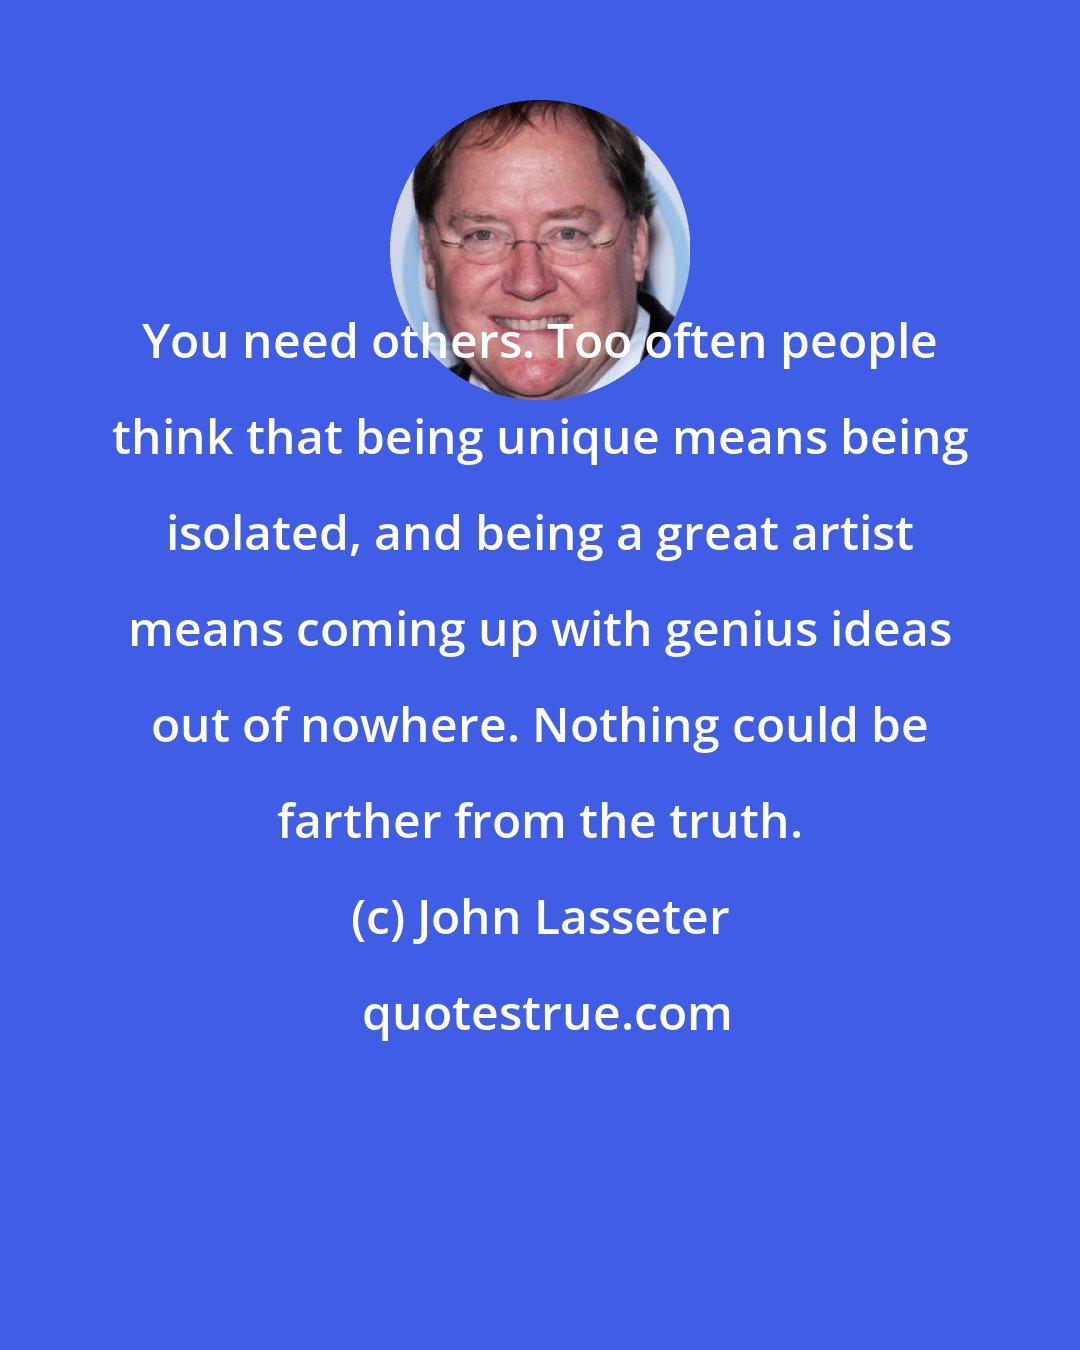 John Lasseter: You need others. Too often people think that being unique means being isolated, and being a great artist means coming up with genius ideas out of nowhere. Nothing could be farther from the truth.